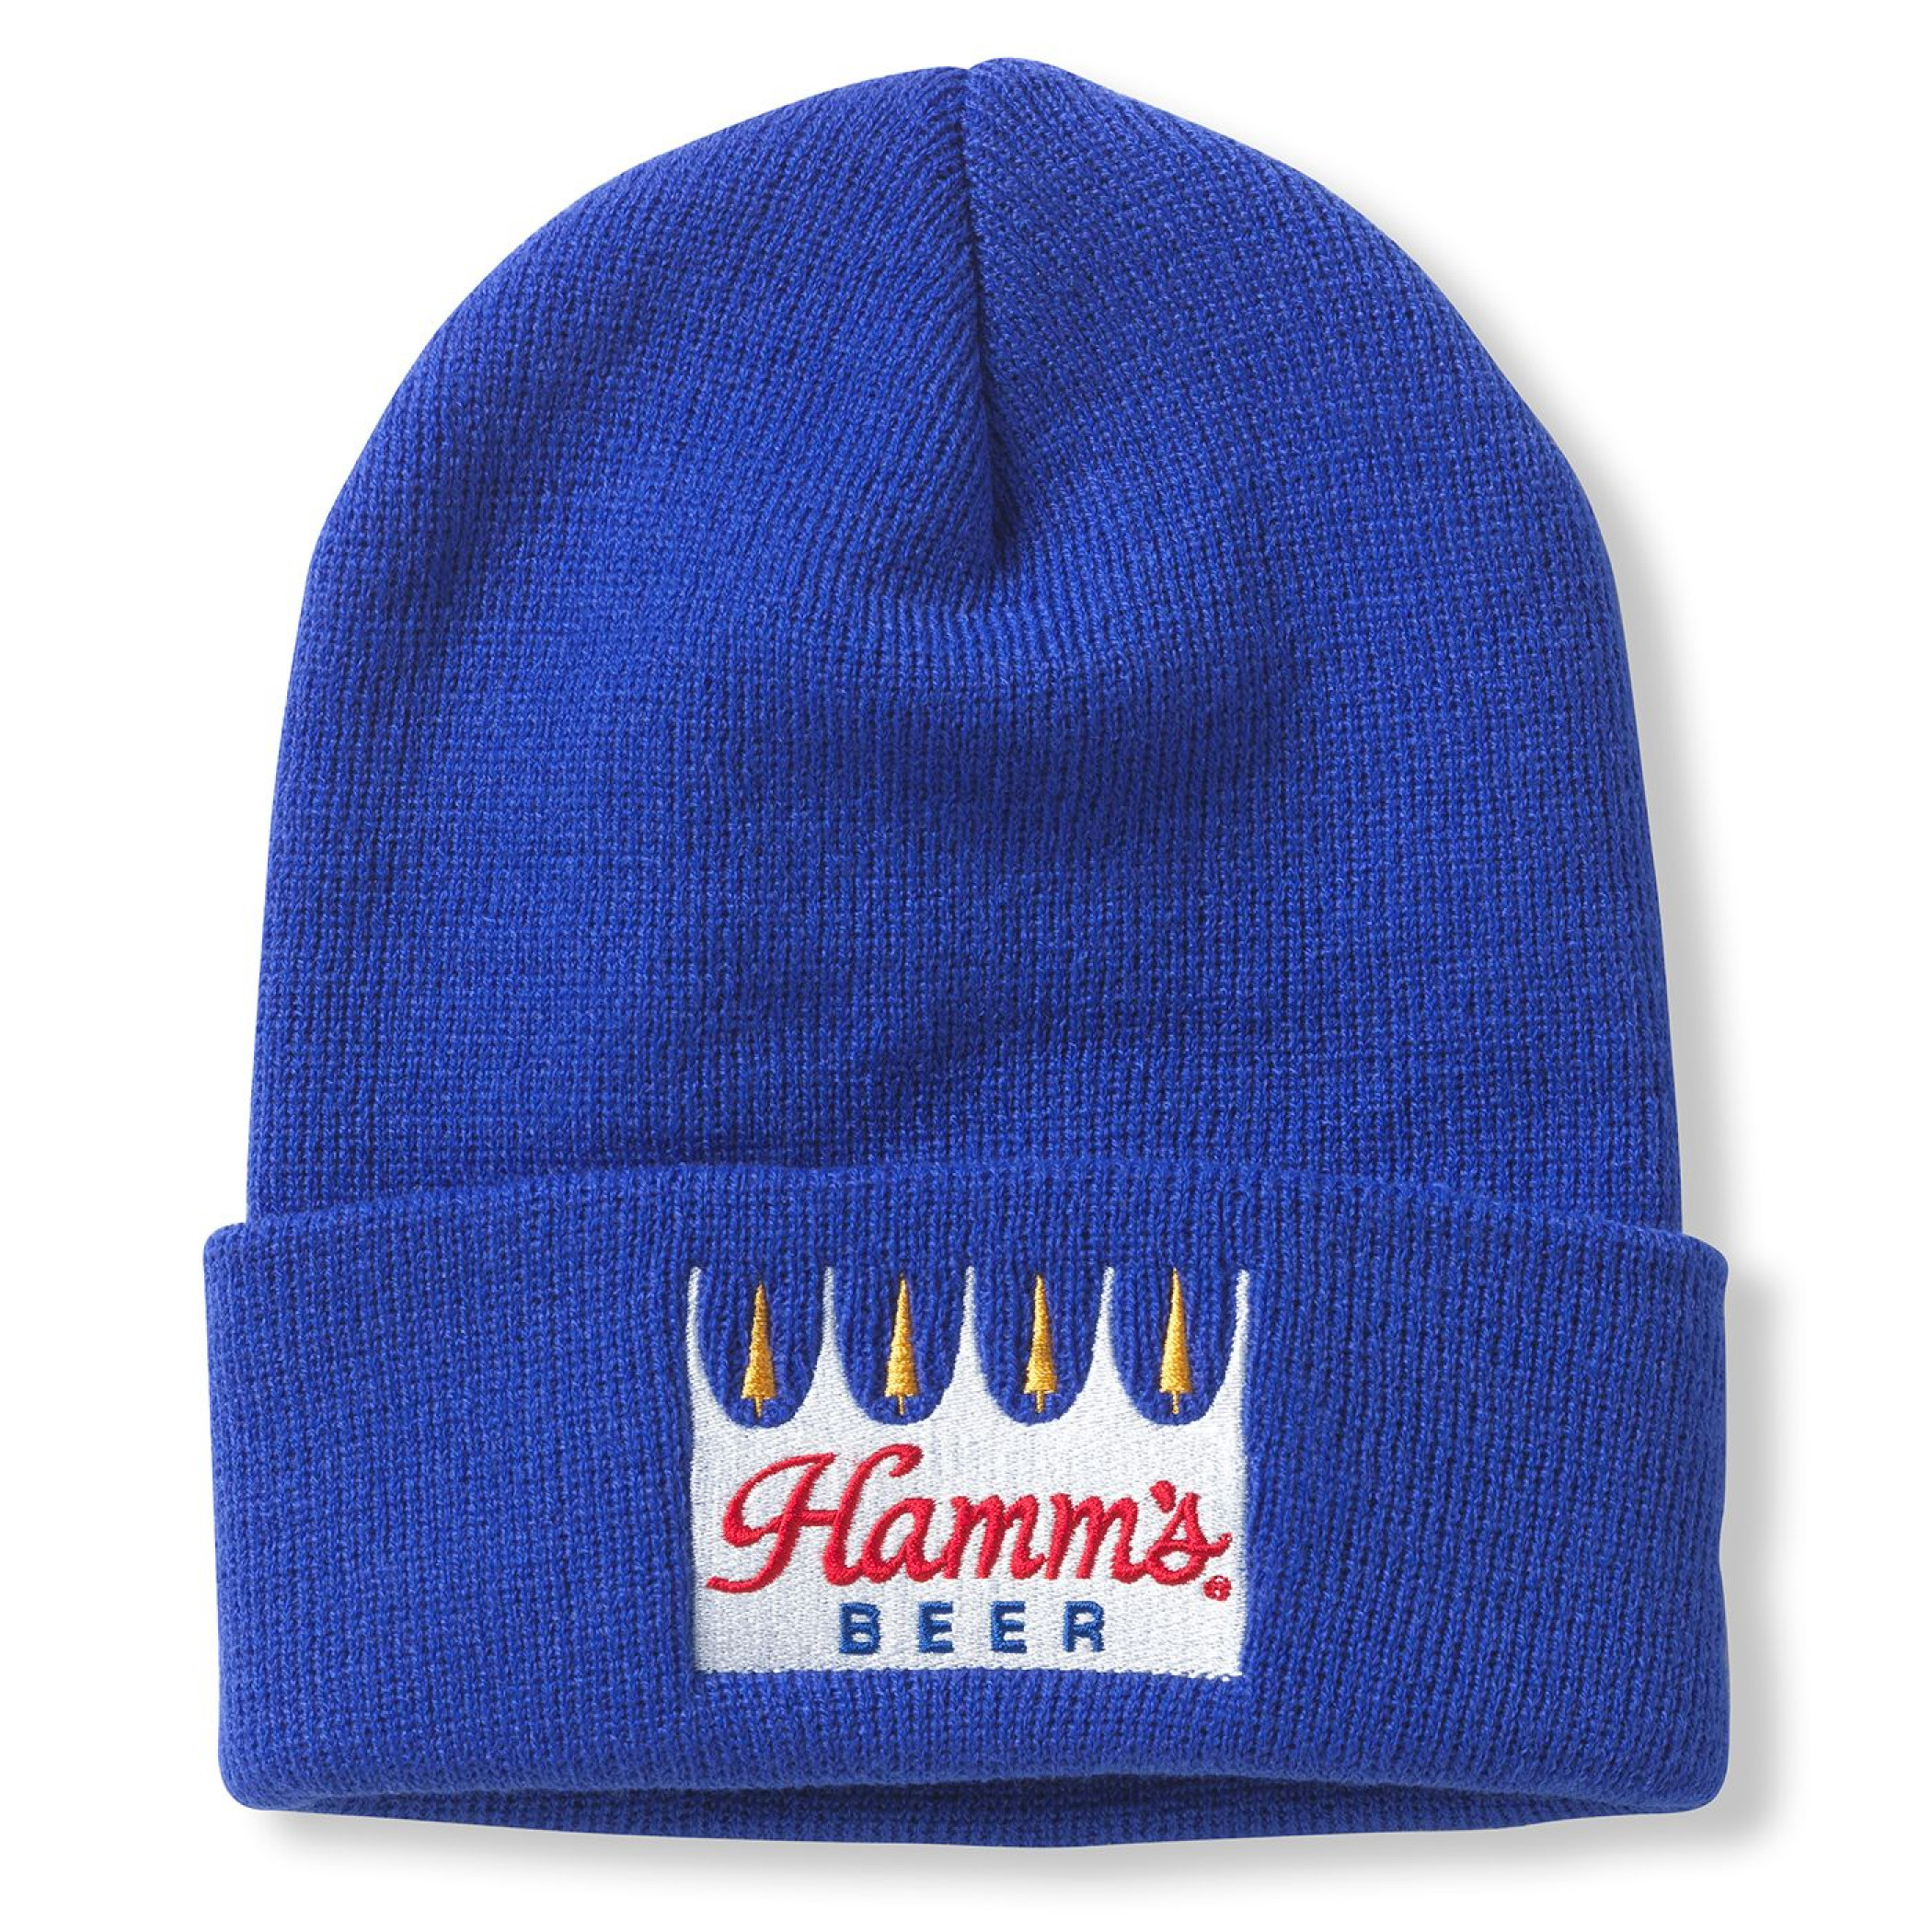 Hamm's Beer Embroidered Logo Cuffed Knit Beanie